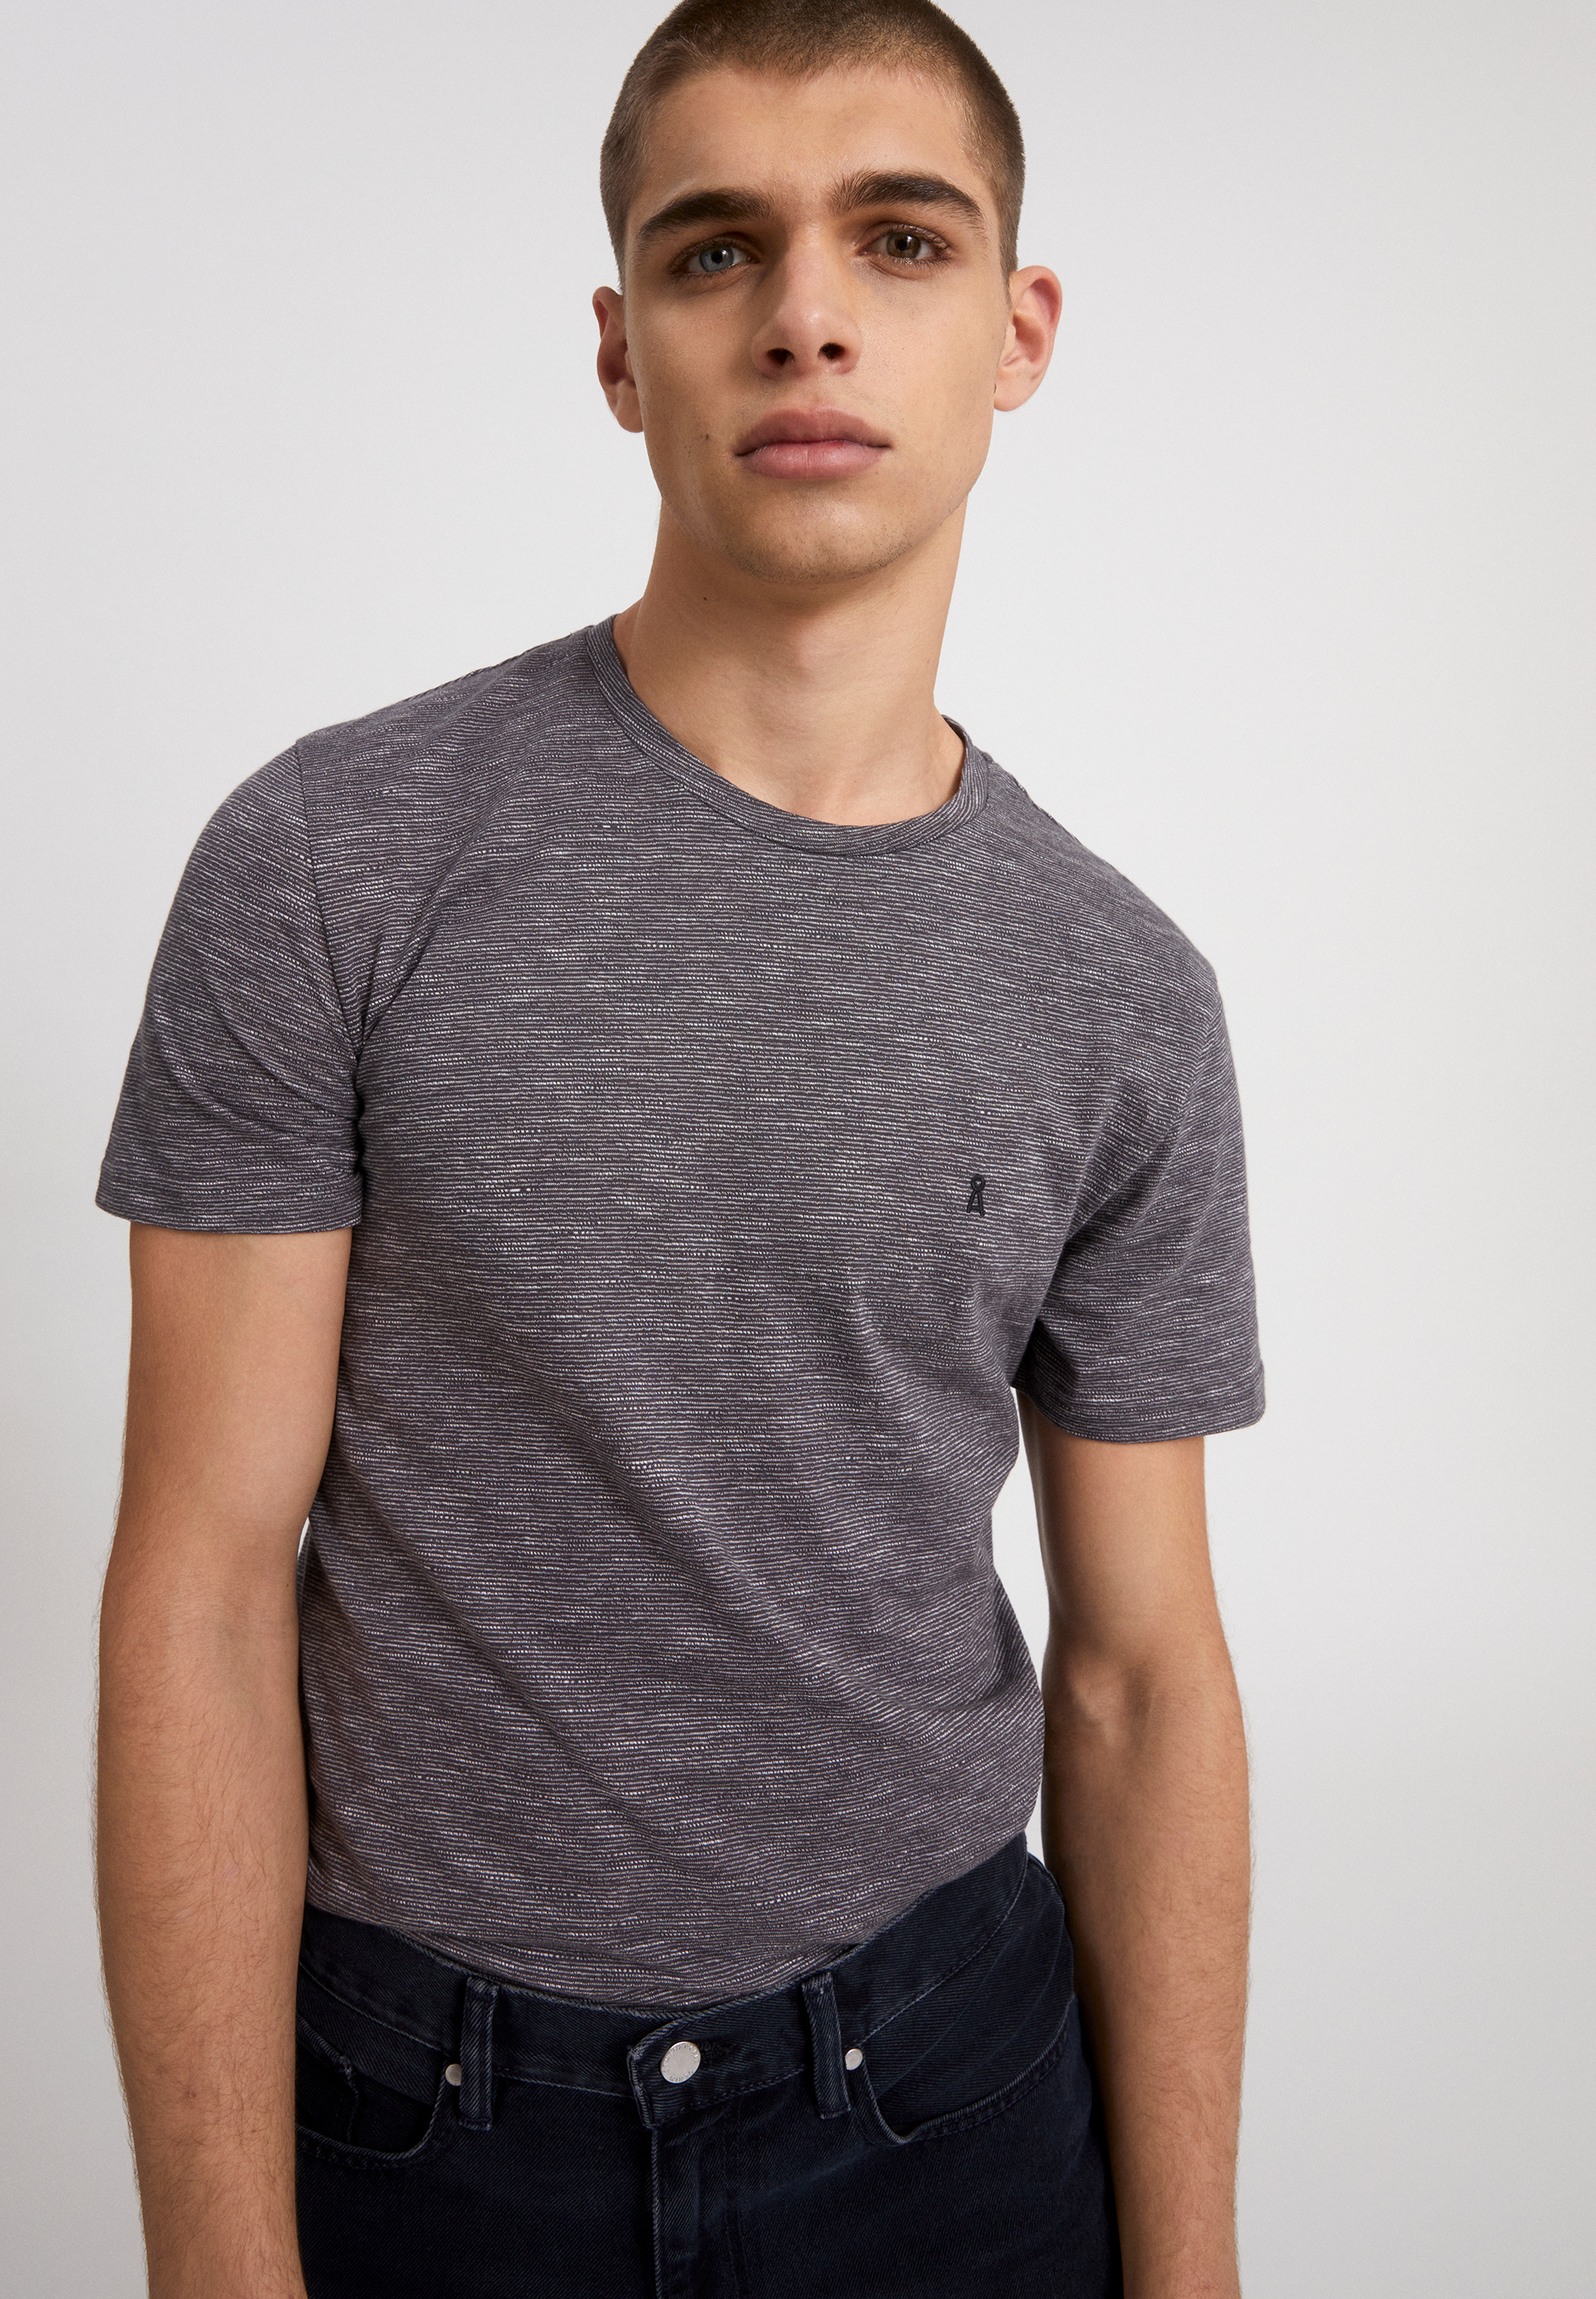 JAAMES STRUCTURE T-Shirt made of Organic Cotton